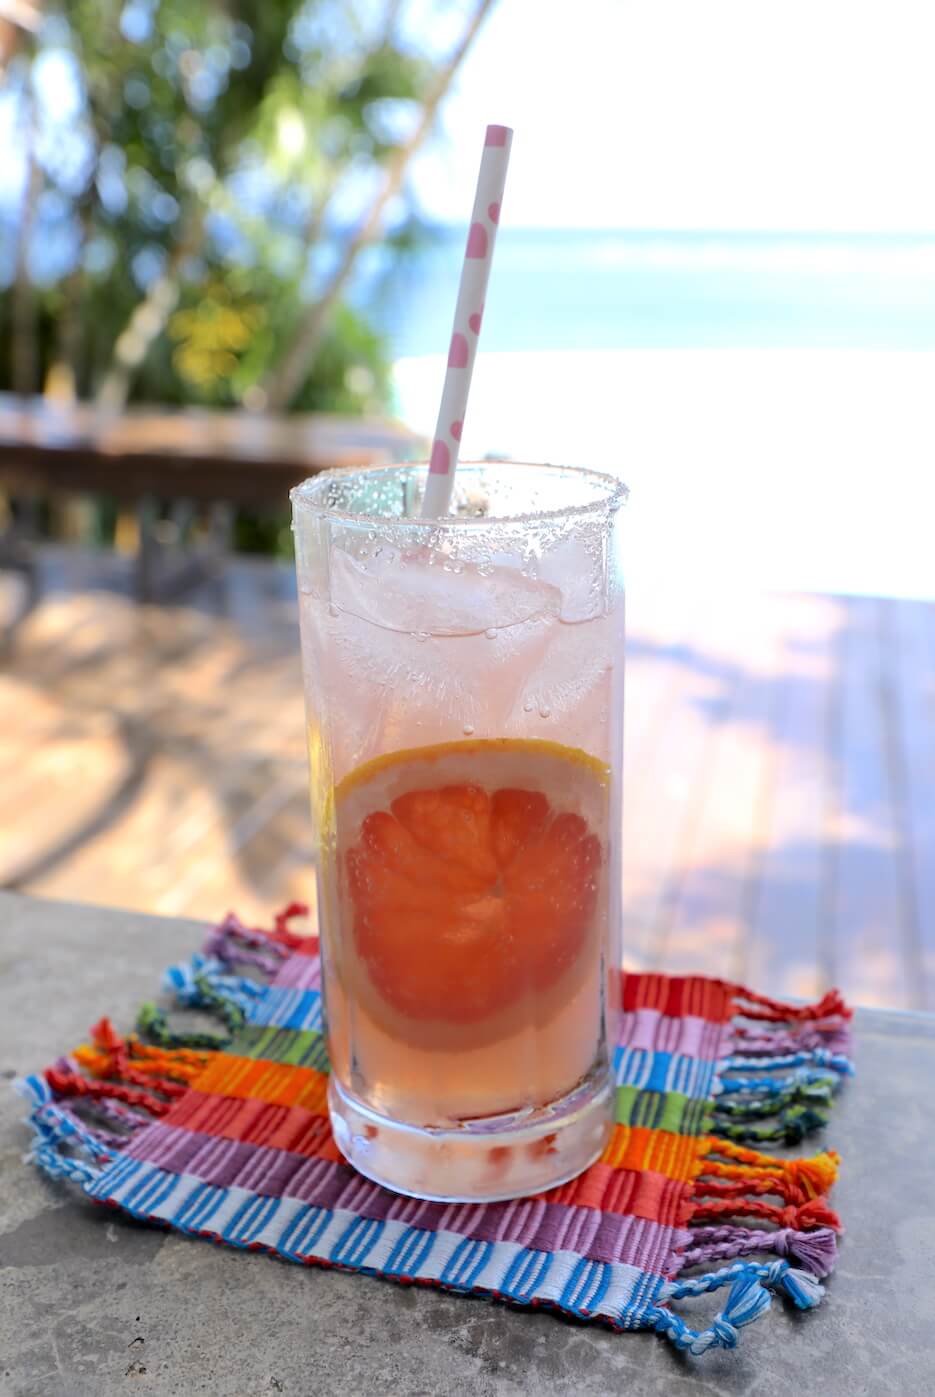 Keto Paloma Cocktail with grapefruit slice garnish and pool in background